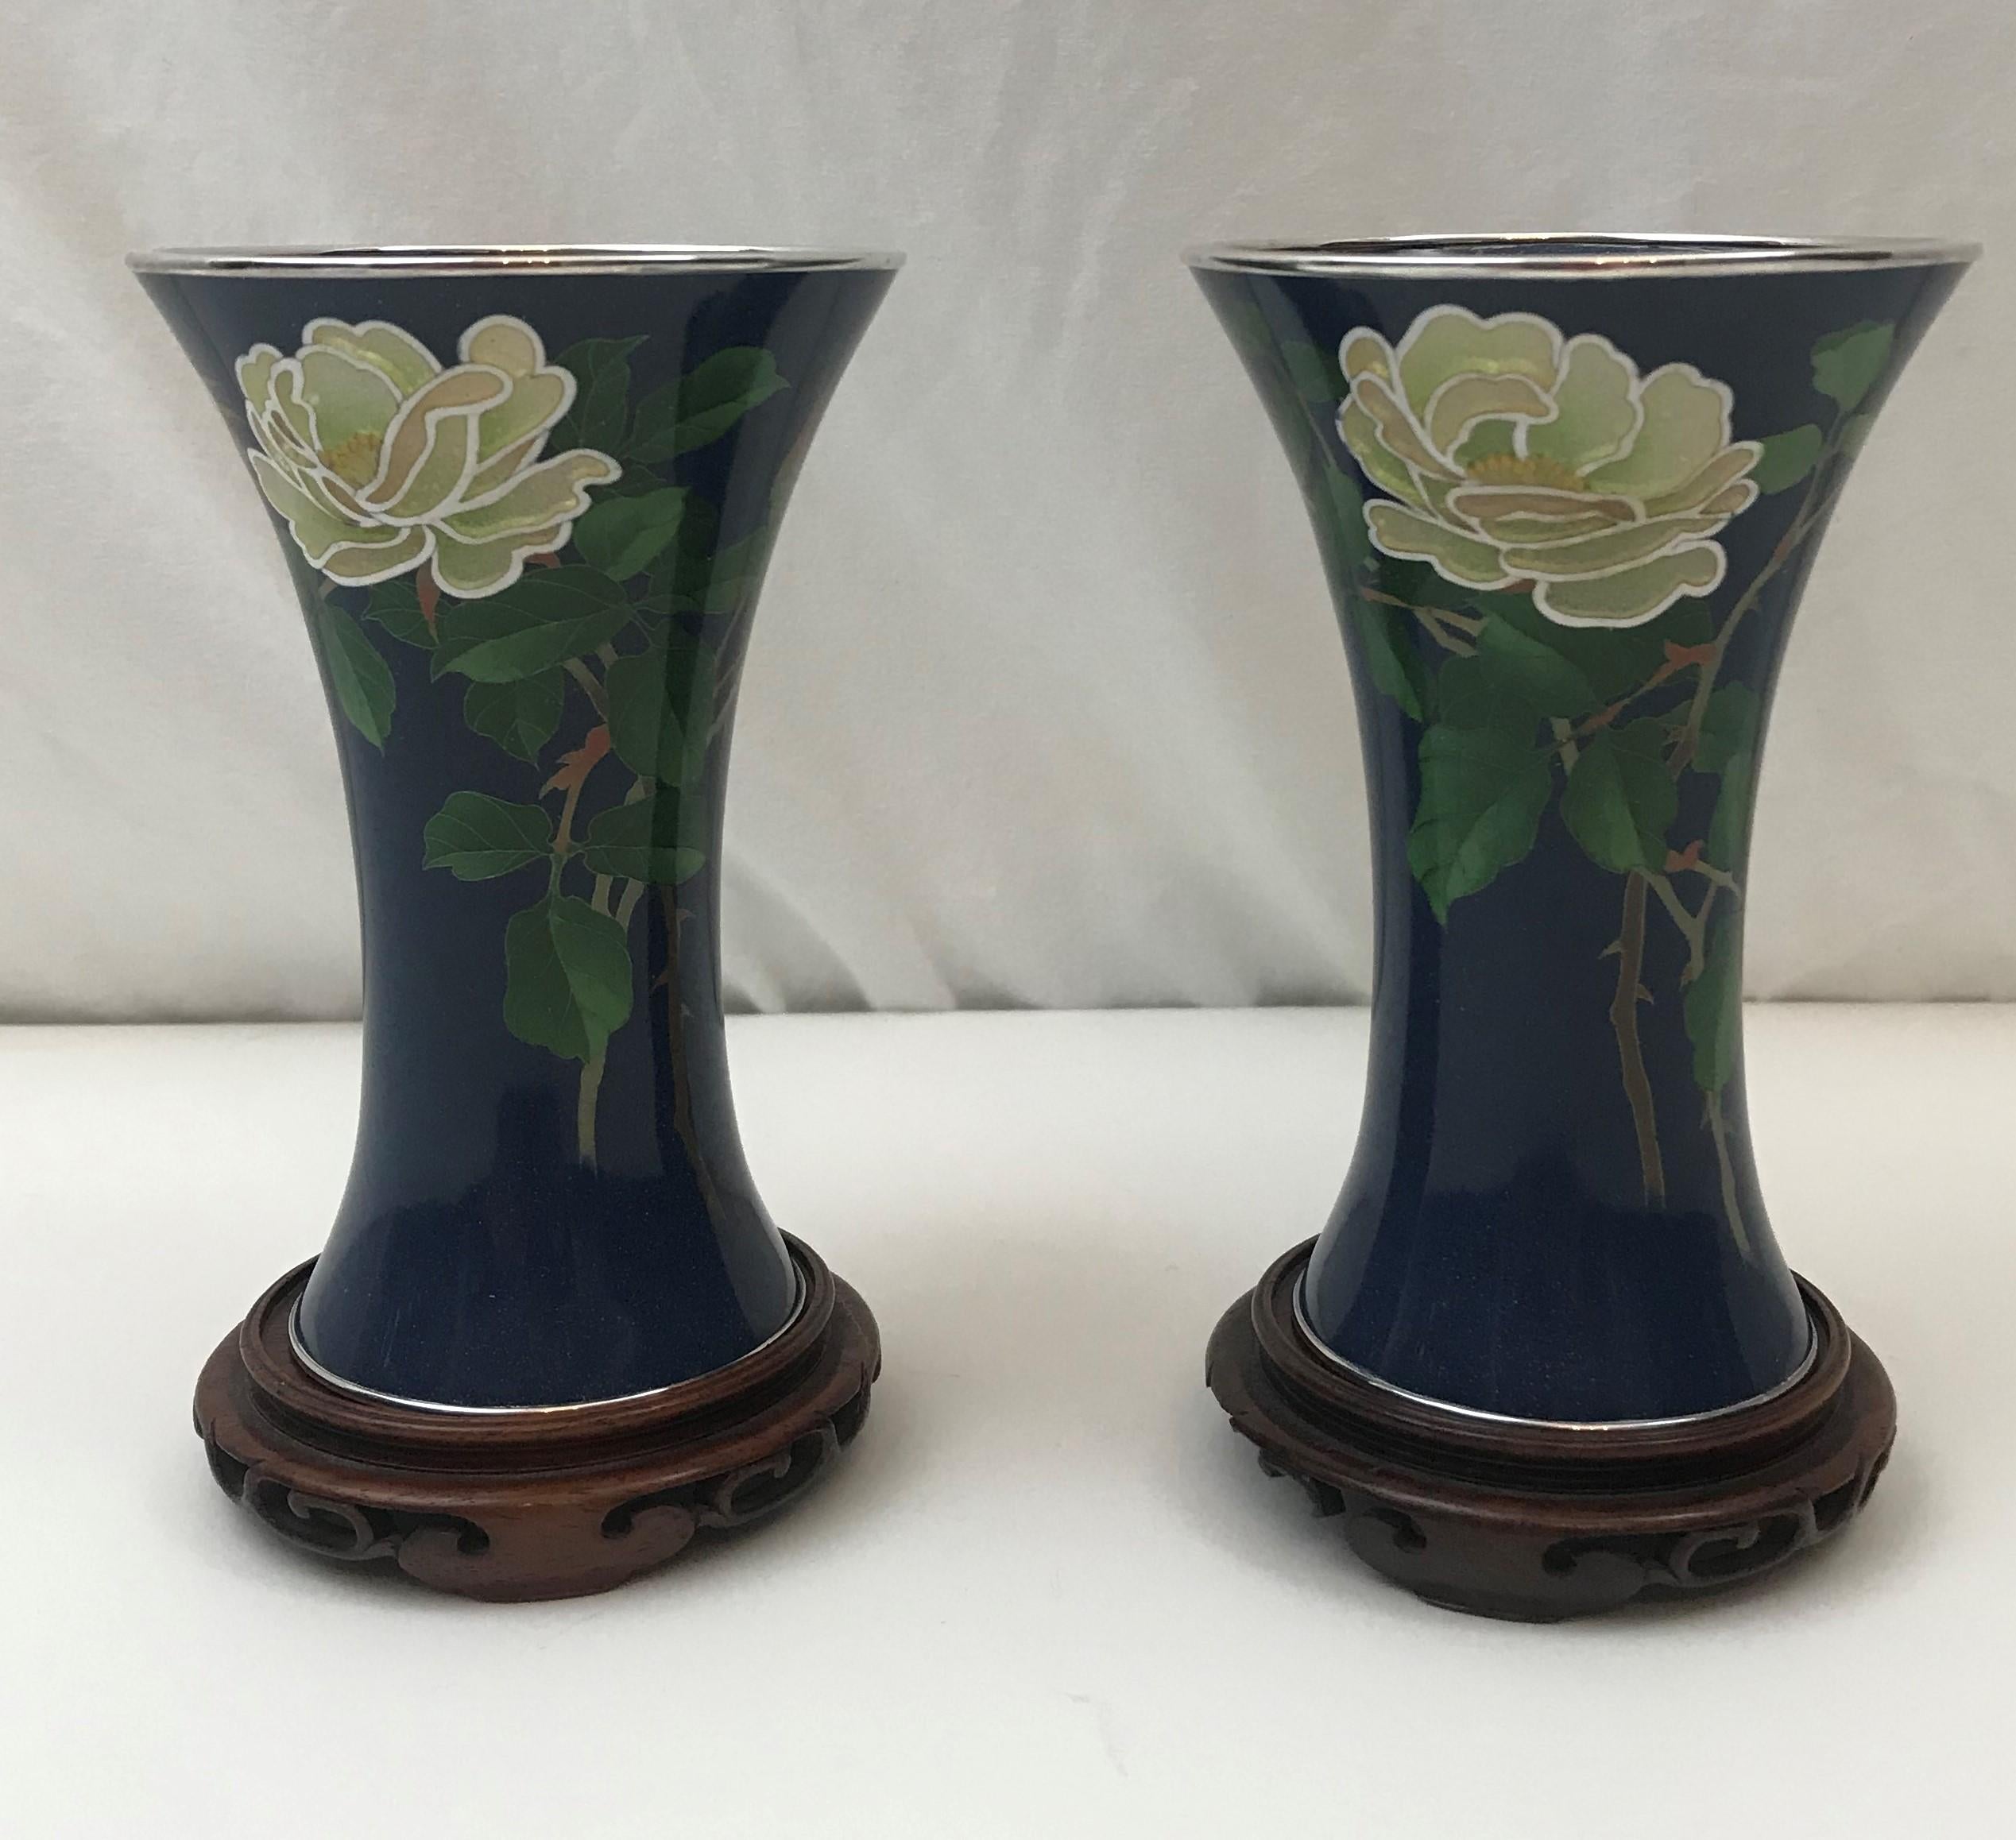 RARE Pair of Ando Jubei Vases, Cloisonne and Plique a Jour Flowers. 5" height.